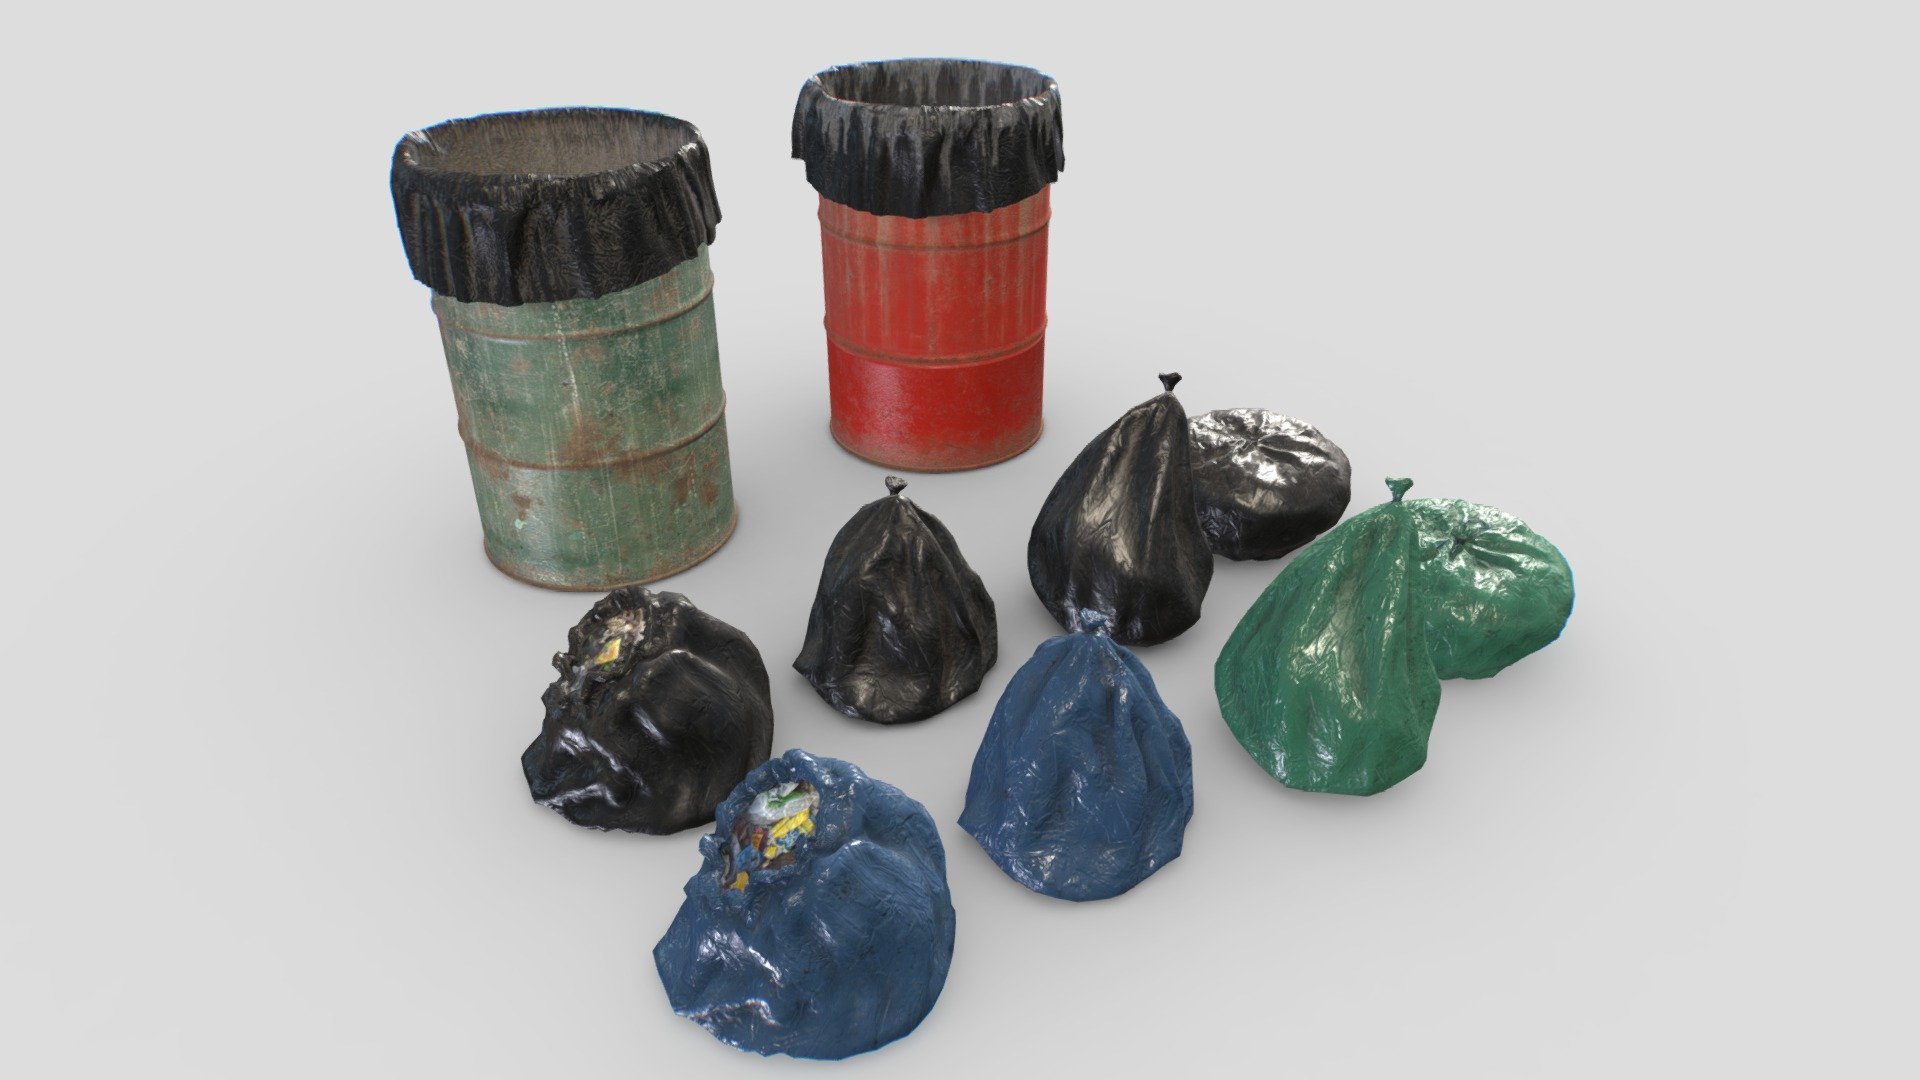 Pack of drum trash cans and bags . Realistic scale. Includes 4 bags and a configurable drum (barrel, trash inside and plastic bag are separate objects).

Each object comes with 2 texture sets (materials) for a total of 14 different objects and 4 materials. Each mesh use 1 material only.

PBR 4096x PBR textures including Albedo, Normal, Metalness, Roughness and AO. Unreal ARM mask texture included (ao, rough, metal). Also unity HDRP mask included.

20k verts and 40k tris in total.

Suitable for garages, landfill, street trash, apocalyptic scenes, etc&hellip; - Drum trash can and trash bags - Buy Royalty Free 3D model by 32cm 3d model